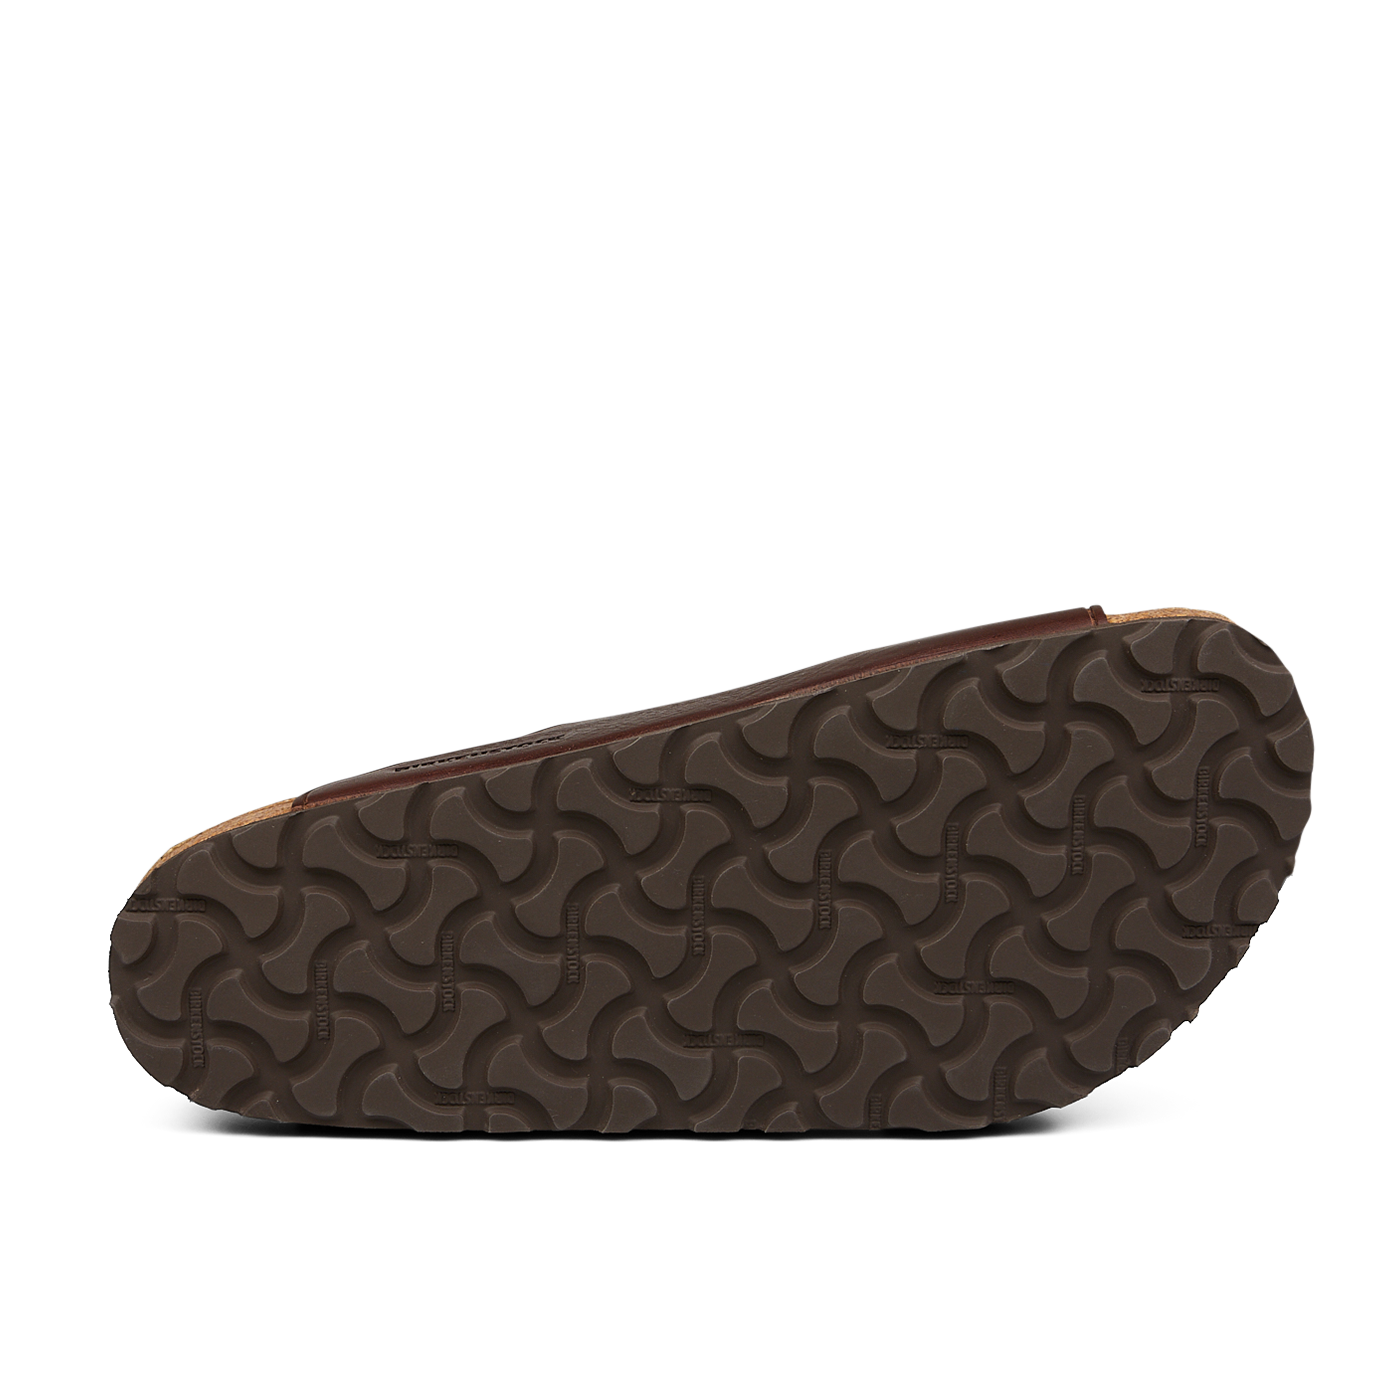 Bottom view of a Birkenstock Roast Bold Natural Leather Arizona Sandal with a dark brown sole featuring a curved, repeating pattern. The upper part of the shoe, crafted in natural leather, is partially visible in brown color.